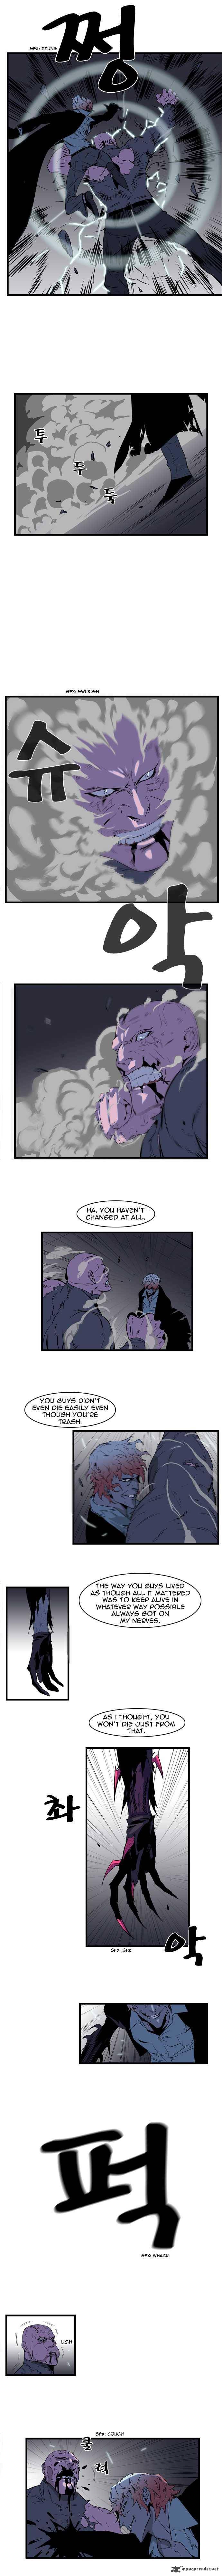 Noblesse Chapter 74 Page 2